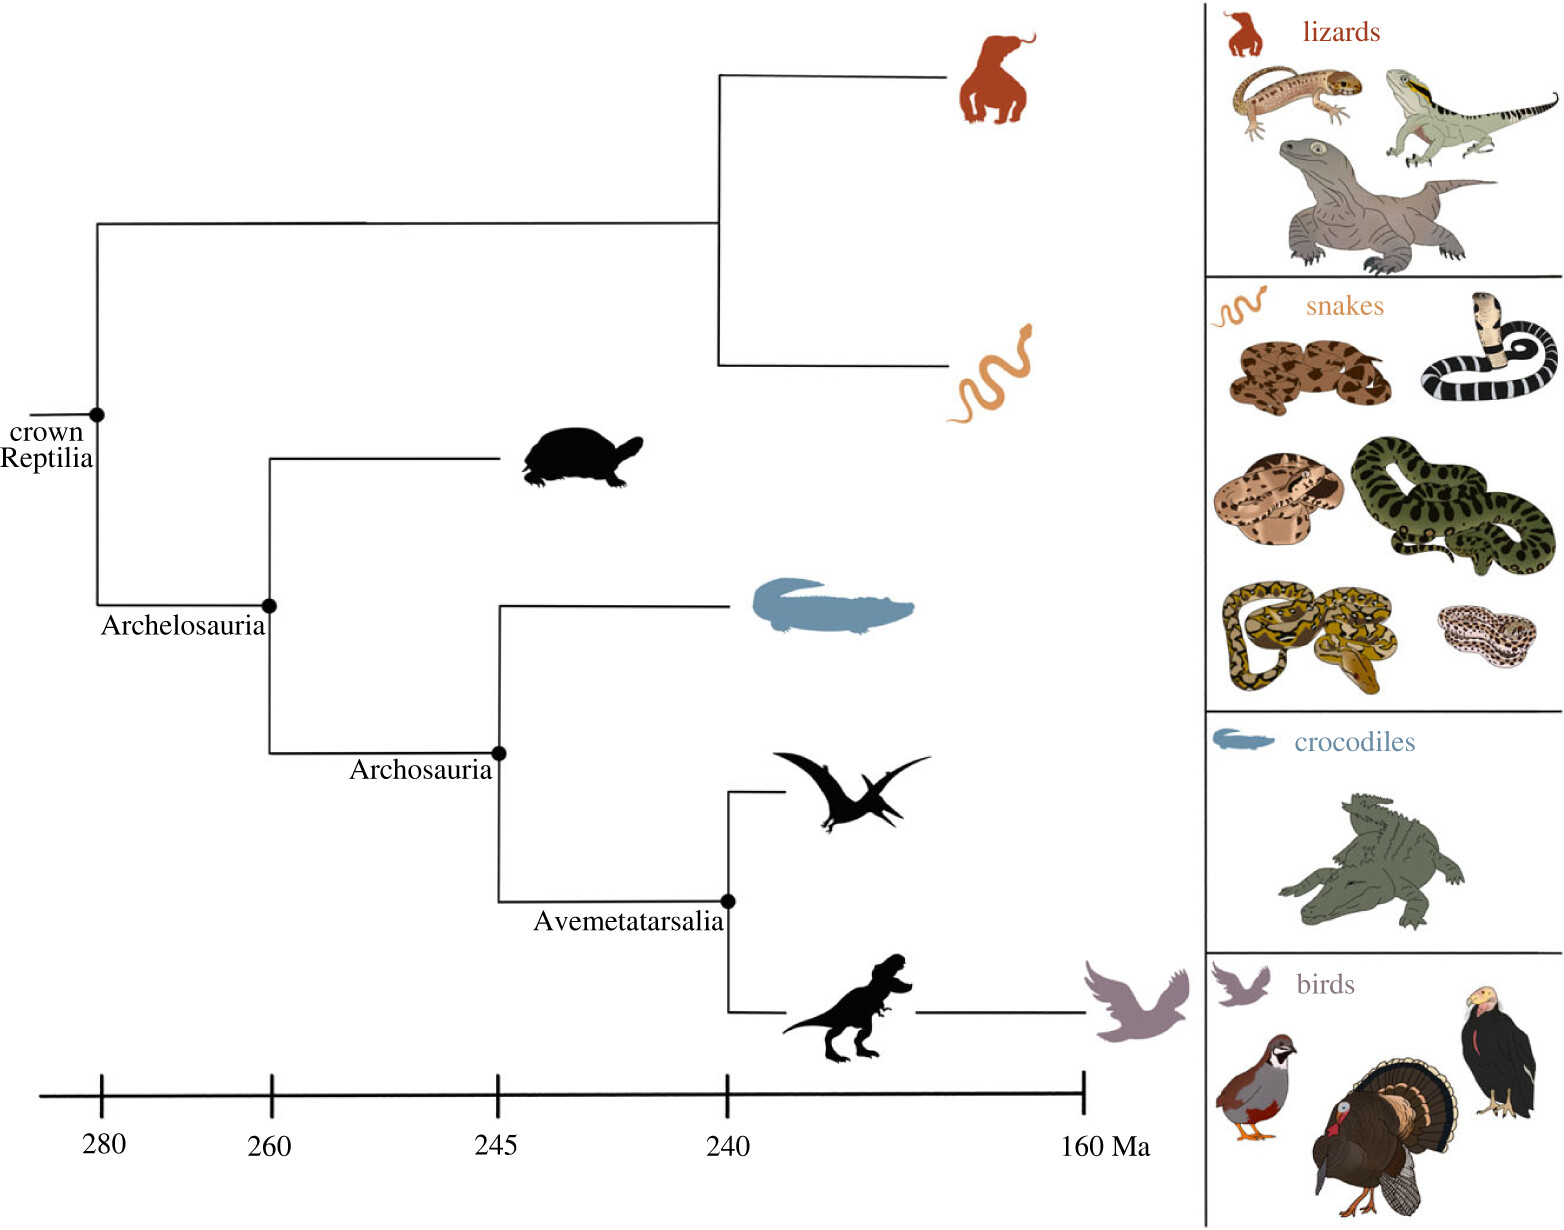 A simplified phylogeny for the crown group Reptilia with major clades is depicted. Highlighted lineages have records of facultative parthenogenesis (FP) via terminal fusion automixis, with some exemplar species reflecting phylogenetic spread where possible. Note that the divergence time scale is not linear. Design credit: Jordan Hartman